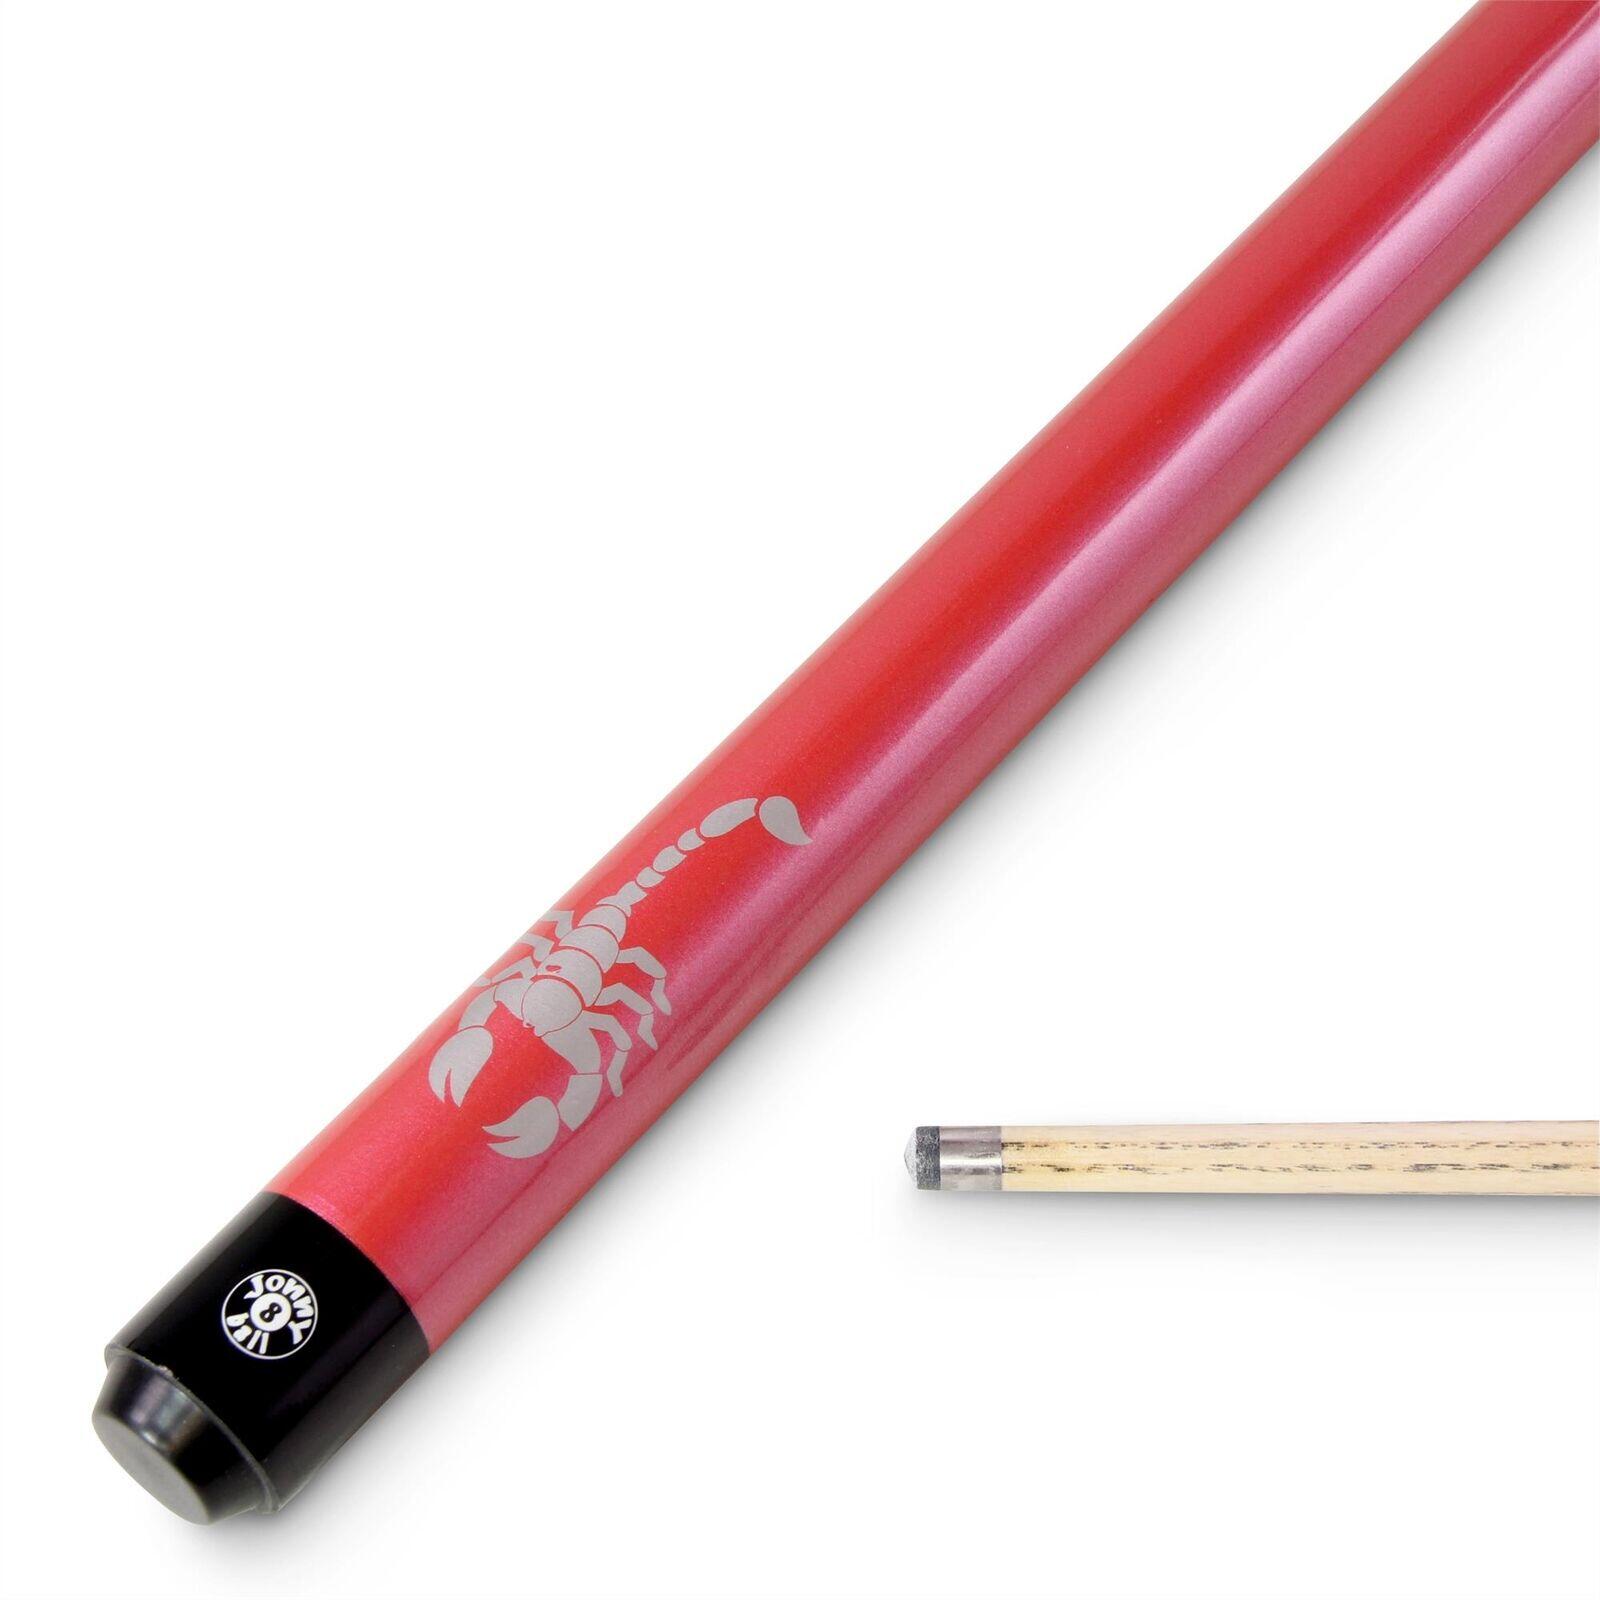 FUNKY CHALK Jonny 8 Ball PINK SCORPION 2pc Centre Joint Ash Snooker Pool Cue with 9mm Tip